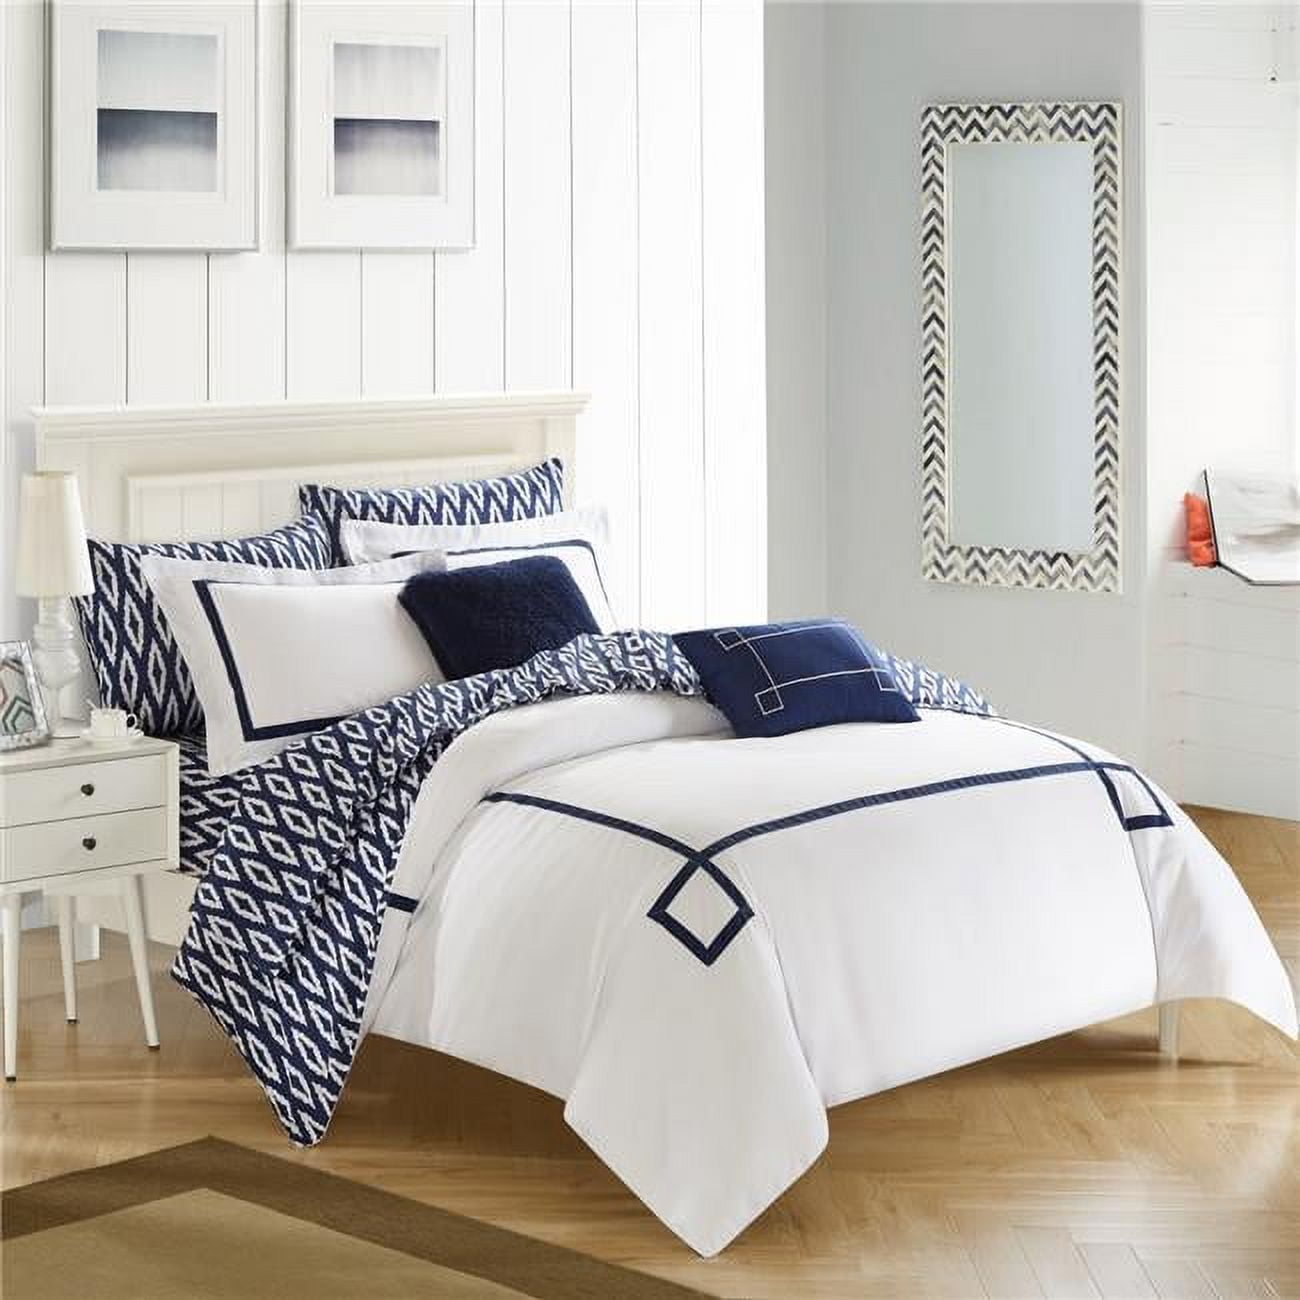 Cs2945-us Sandrine Contemporary Greek Key Embroidered Reversible Bed In A Bag Comforter Set With Sheets - Navy - Queen - 9 Piece